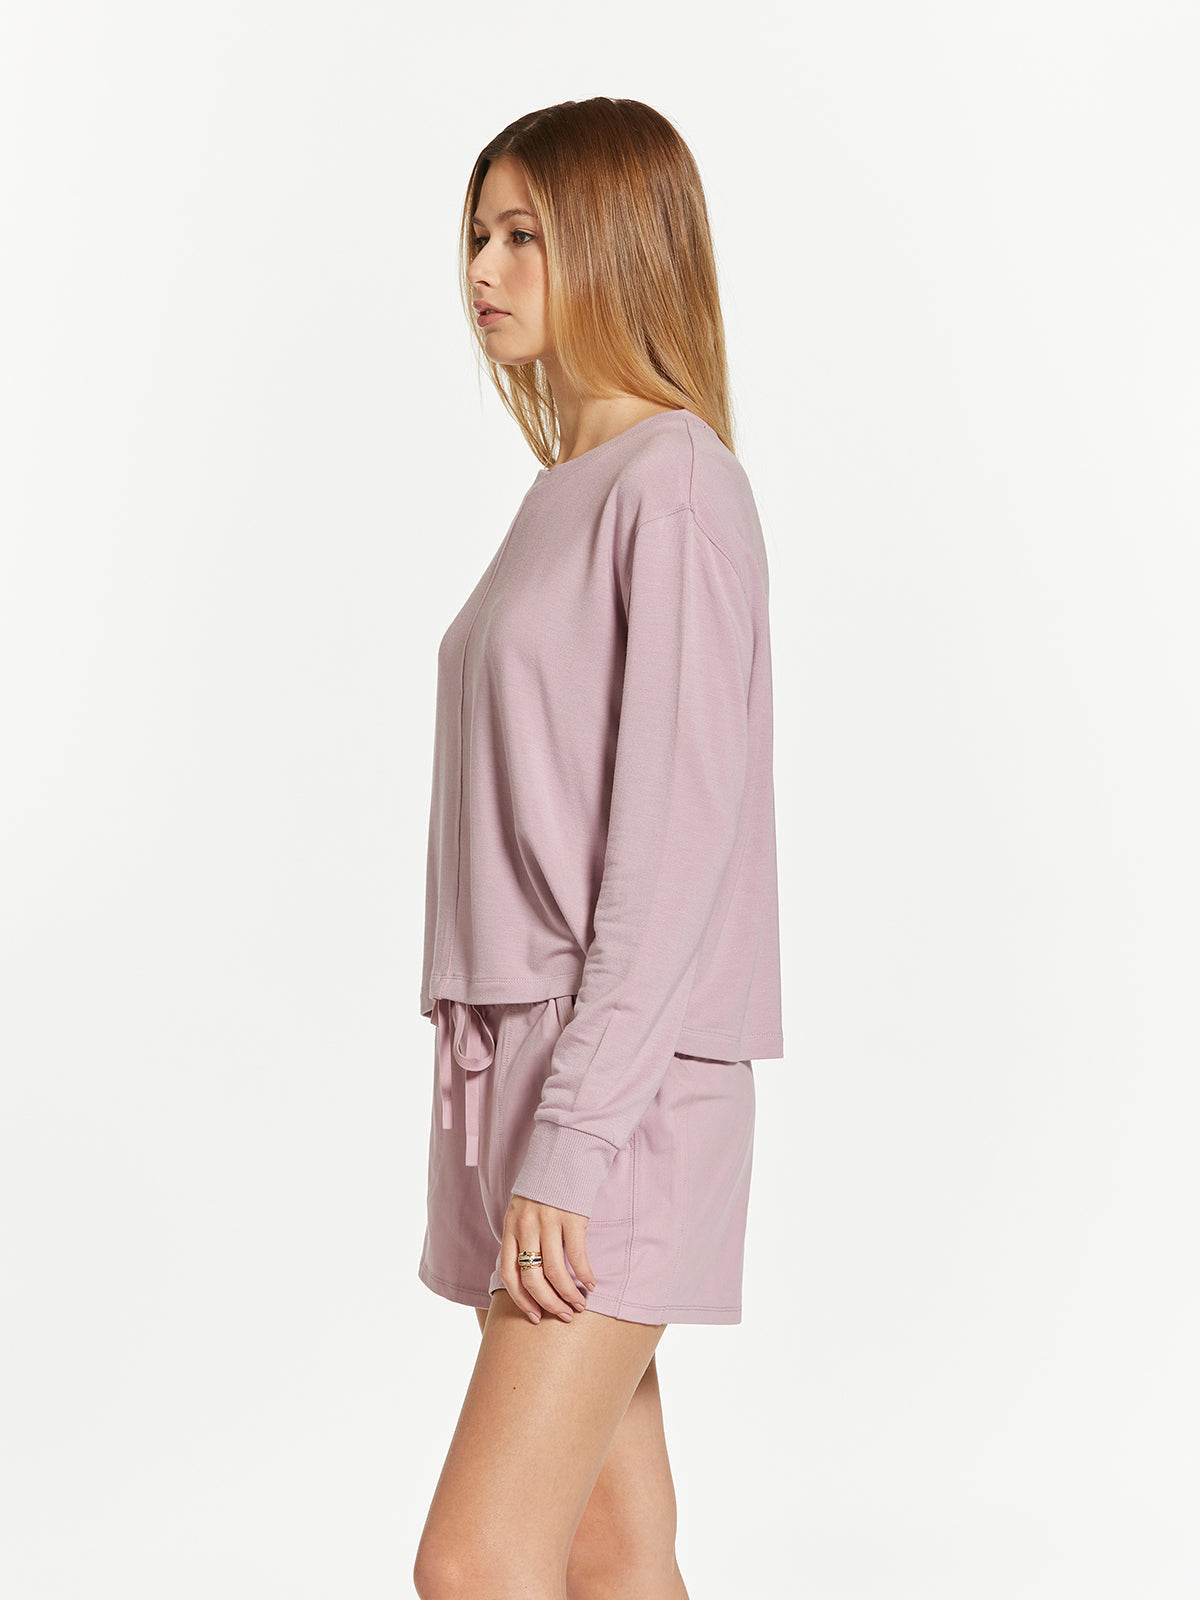 Thread & Supply® Haisley Long Sleeve Soft Top in Violet Rose Color